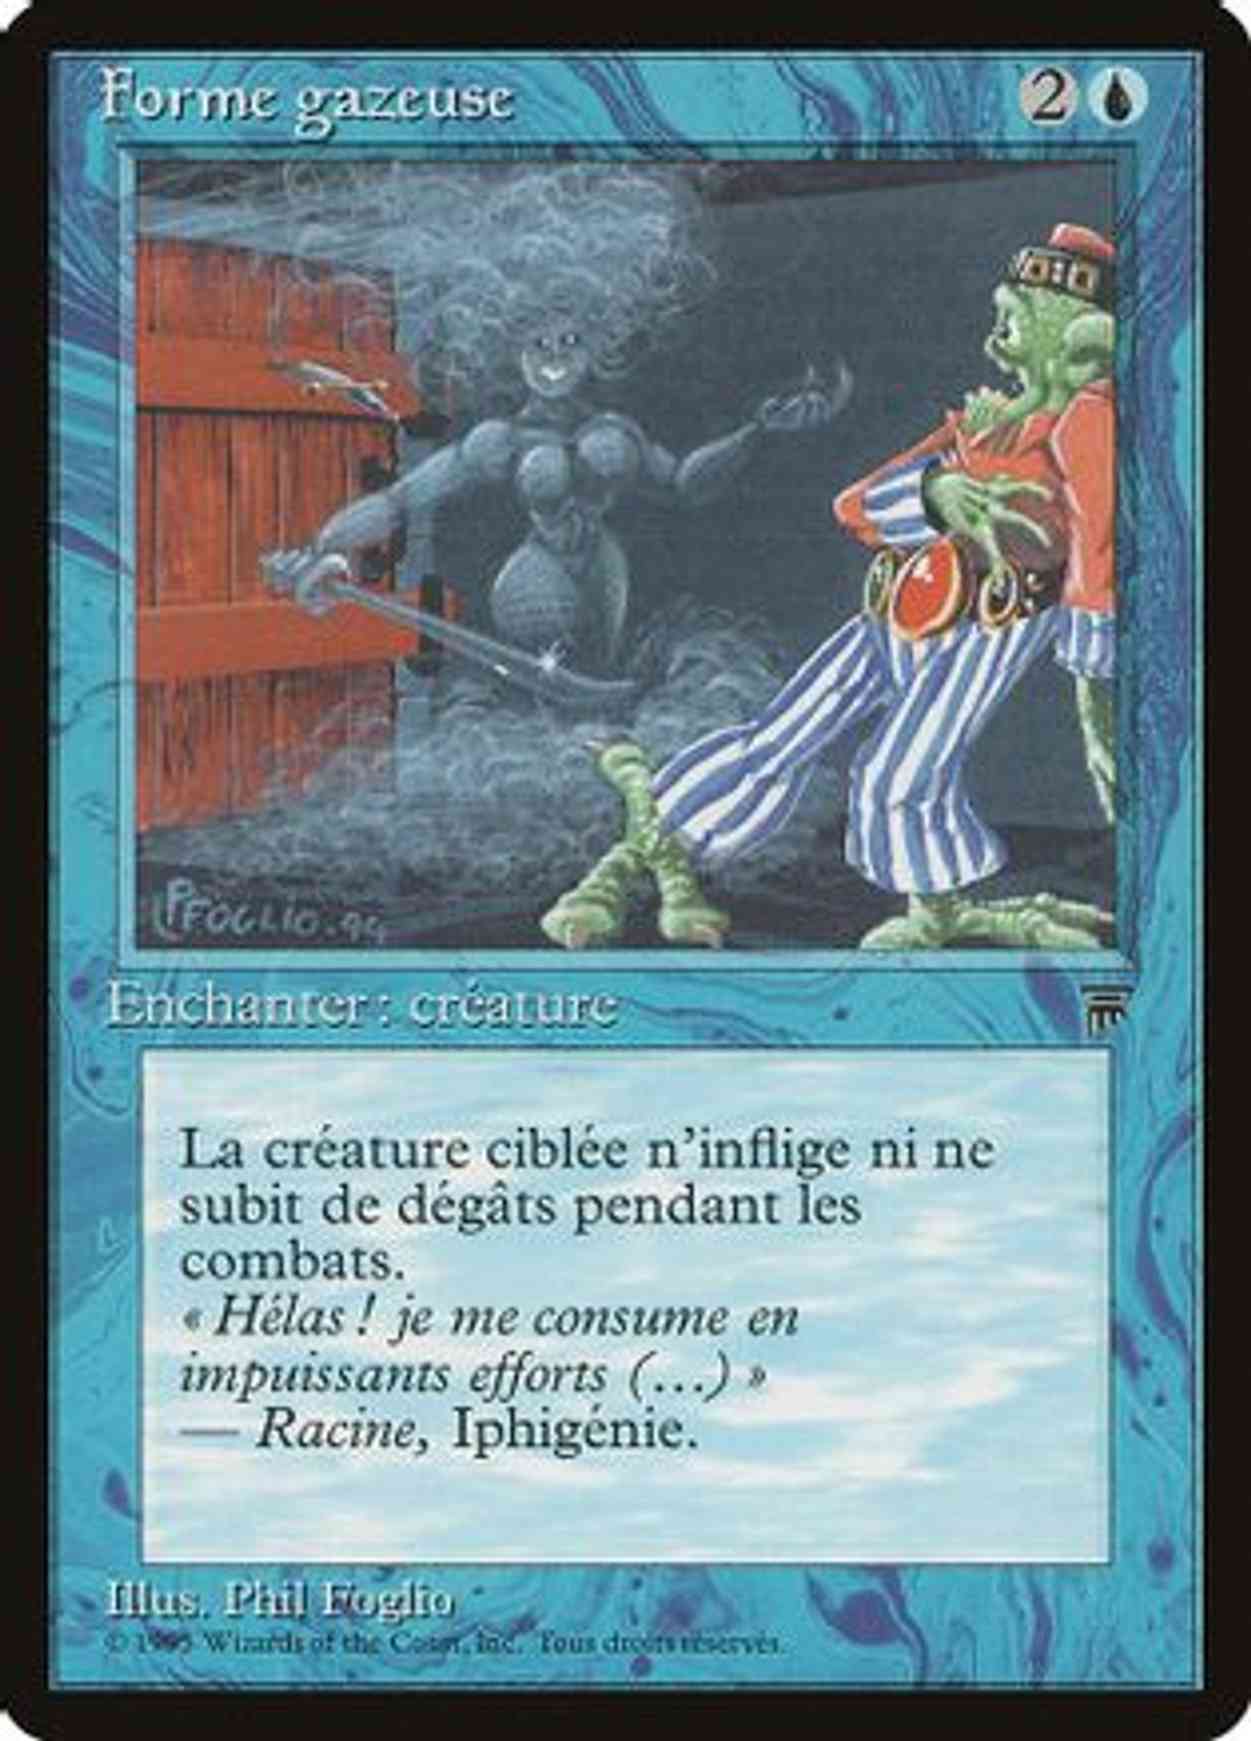 Gaseous Form (French) - "Forme gazuese" magic card front